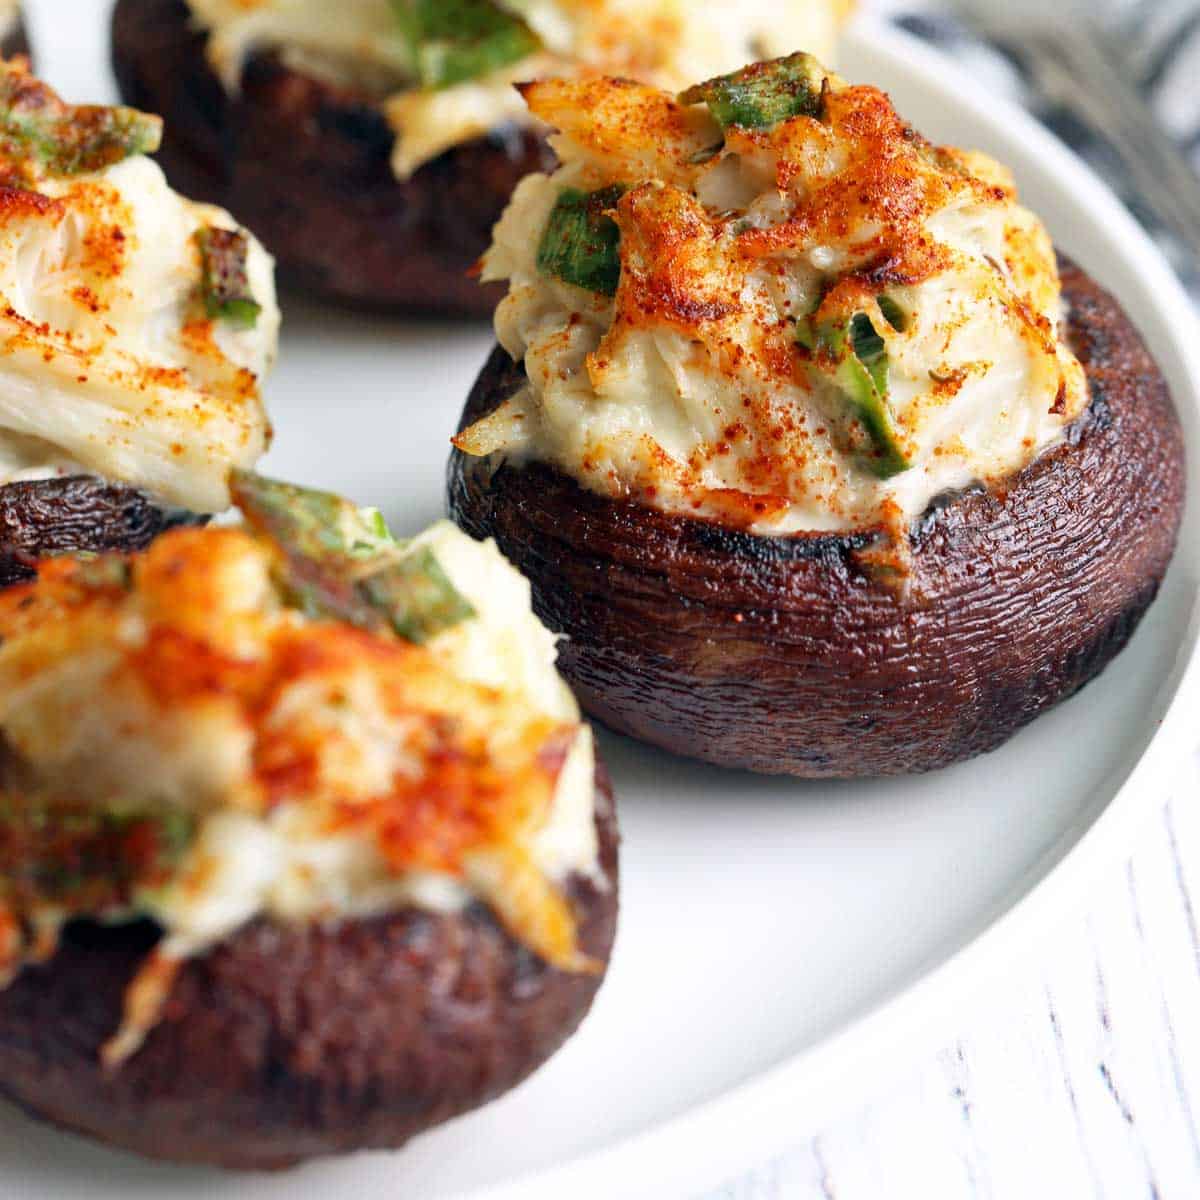 Crab-stuffed mushrooms served on a white plate.